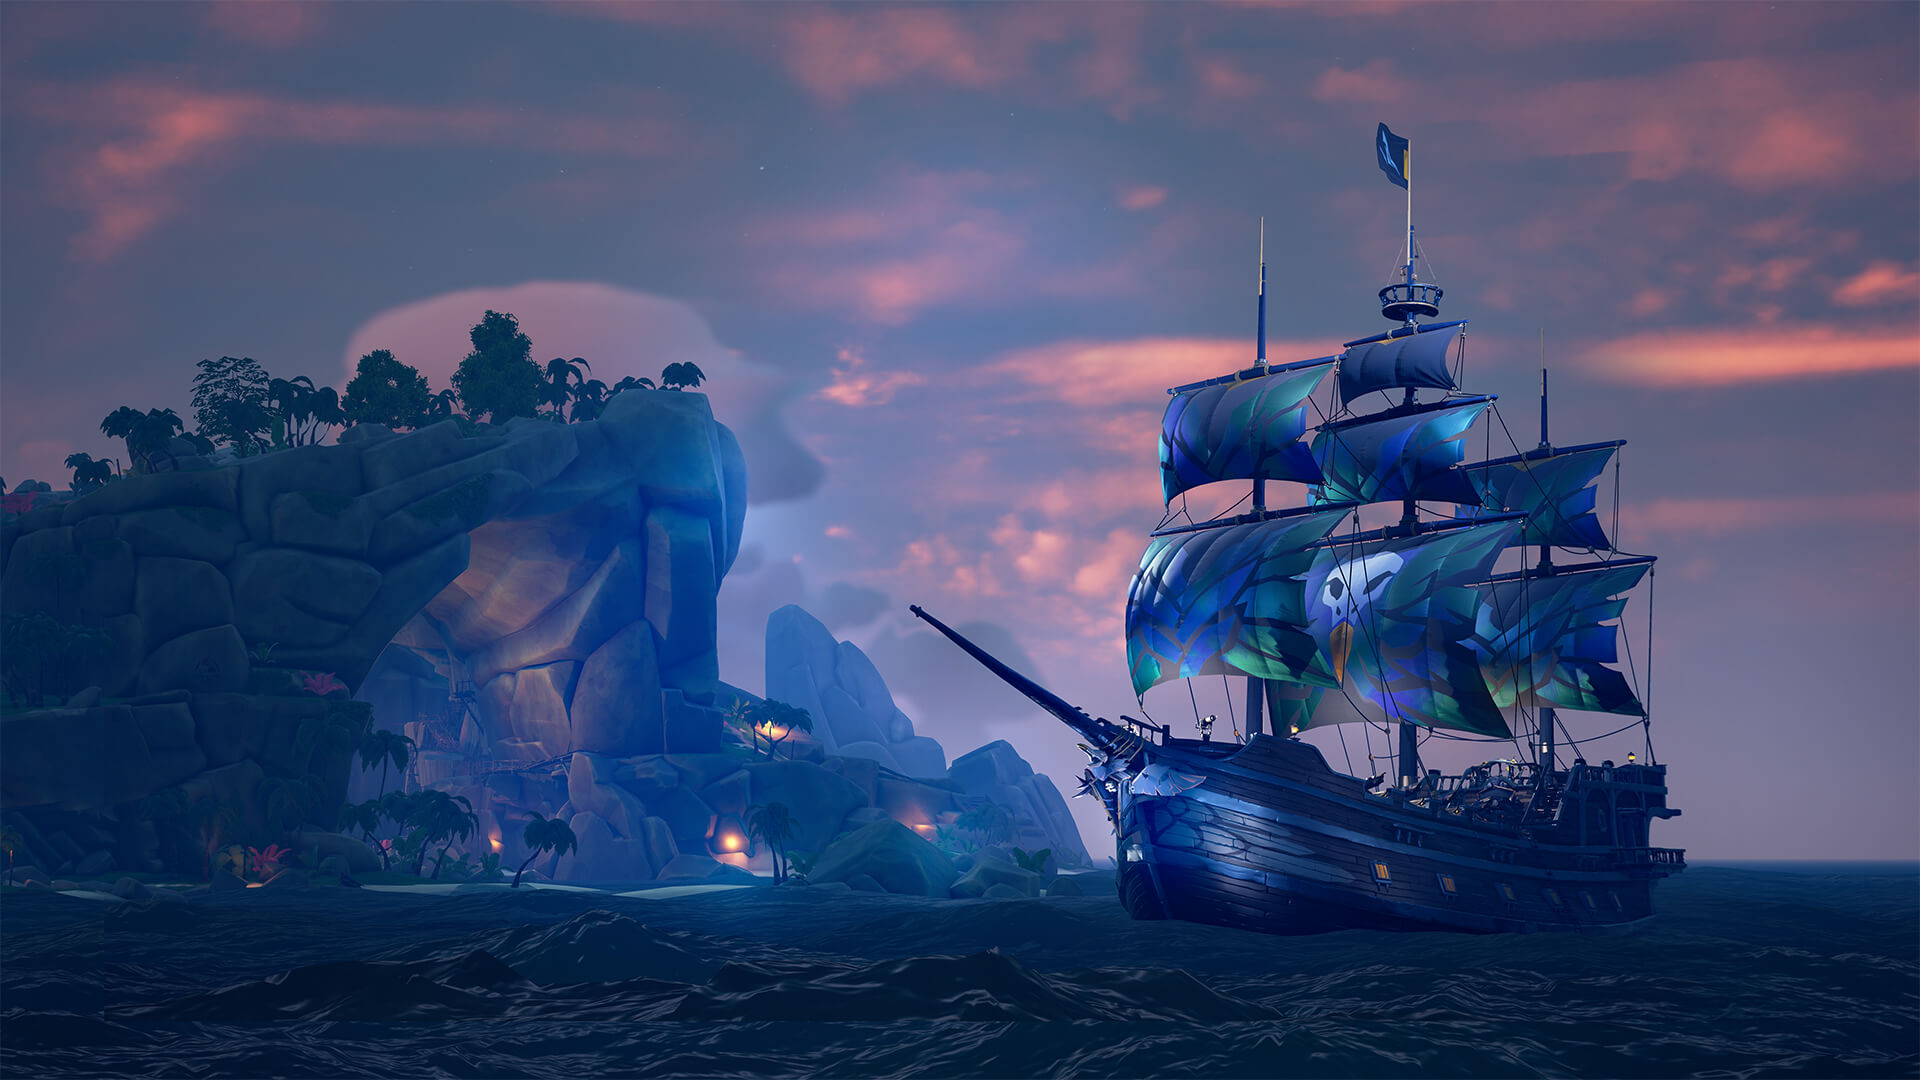 Promotional screenshot of Sea of Thieves